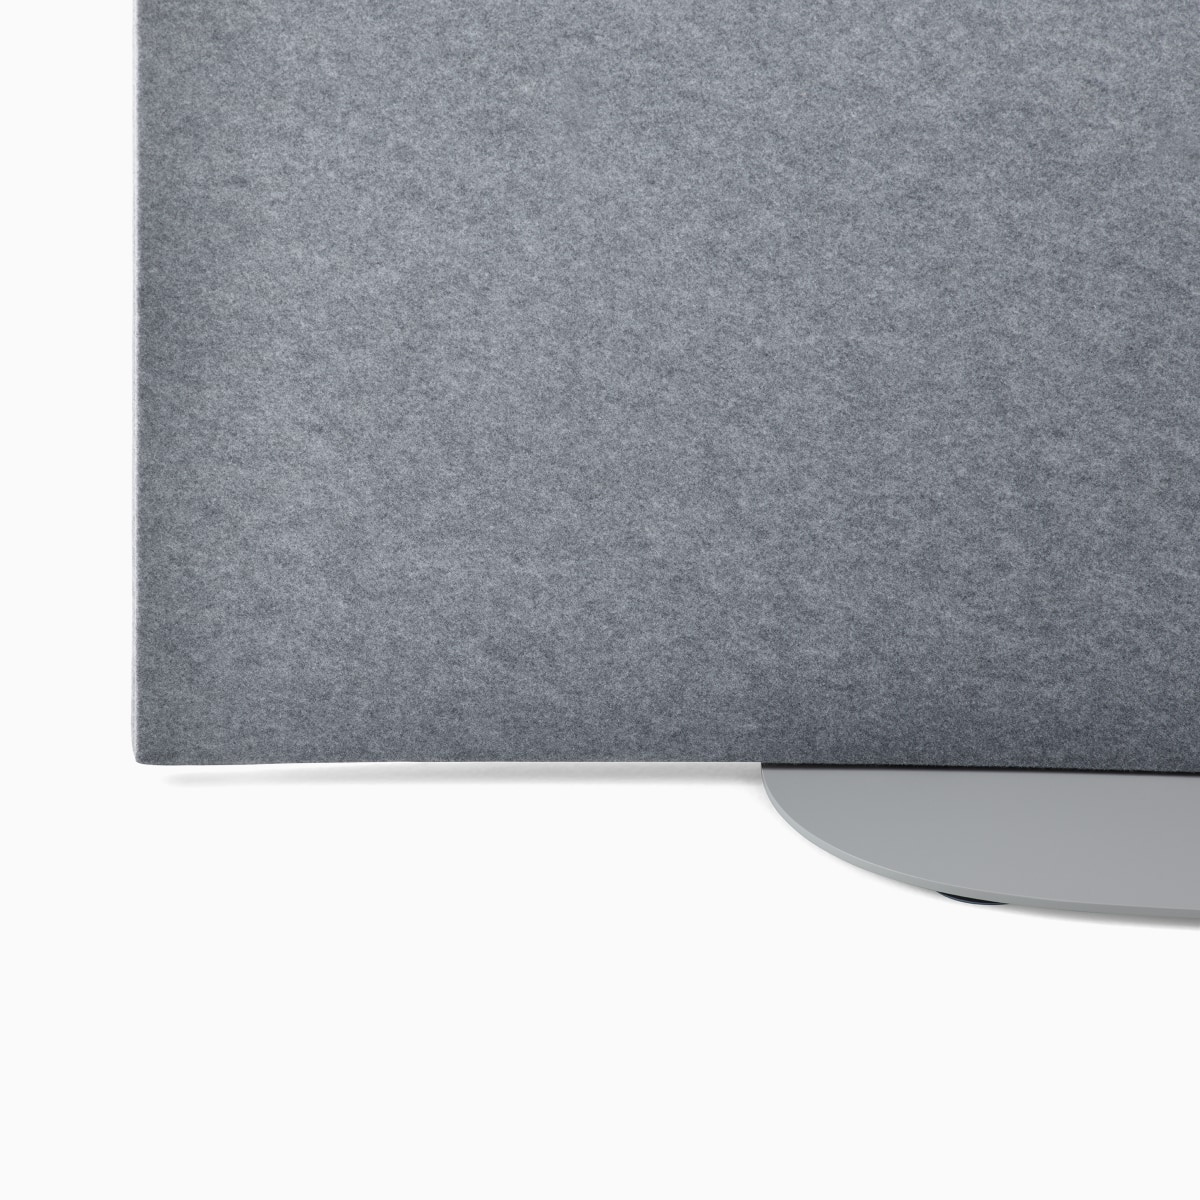 Detail of a grey OE1 Curved Screen with grey base, viewed from the front.